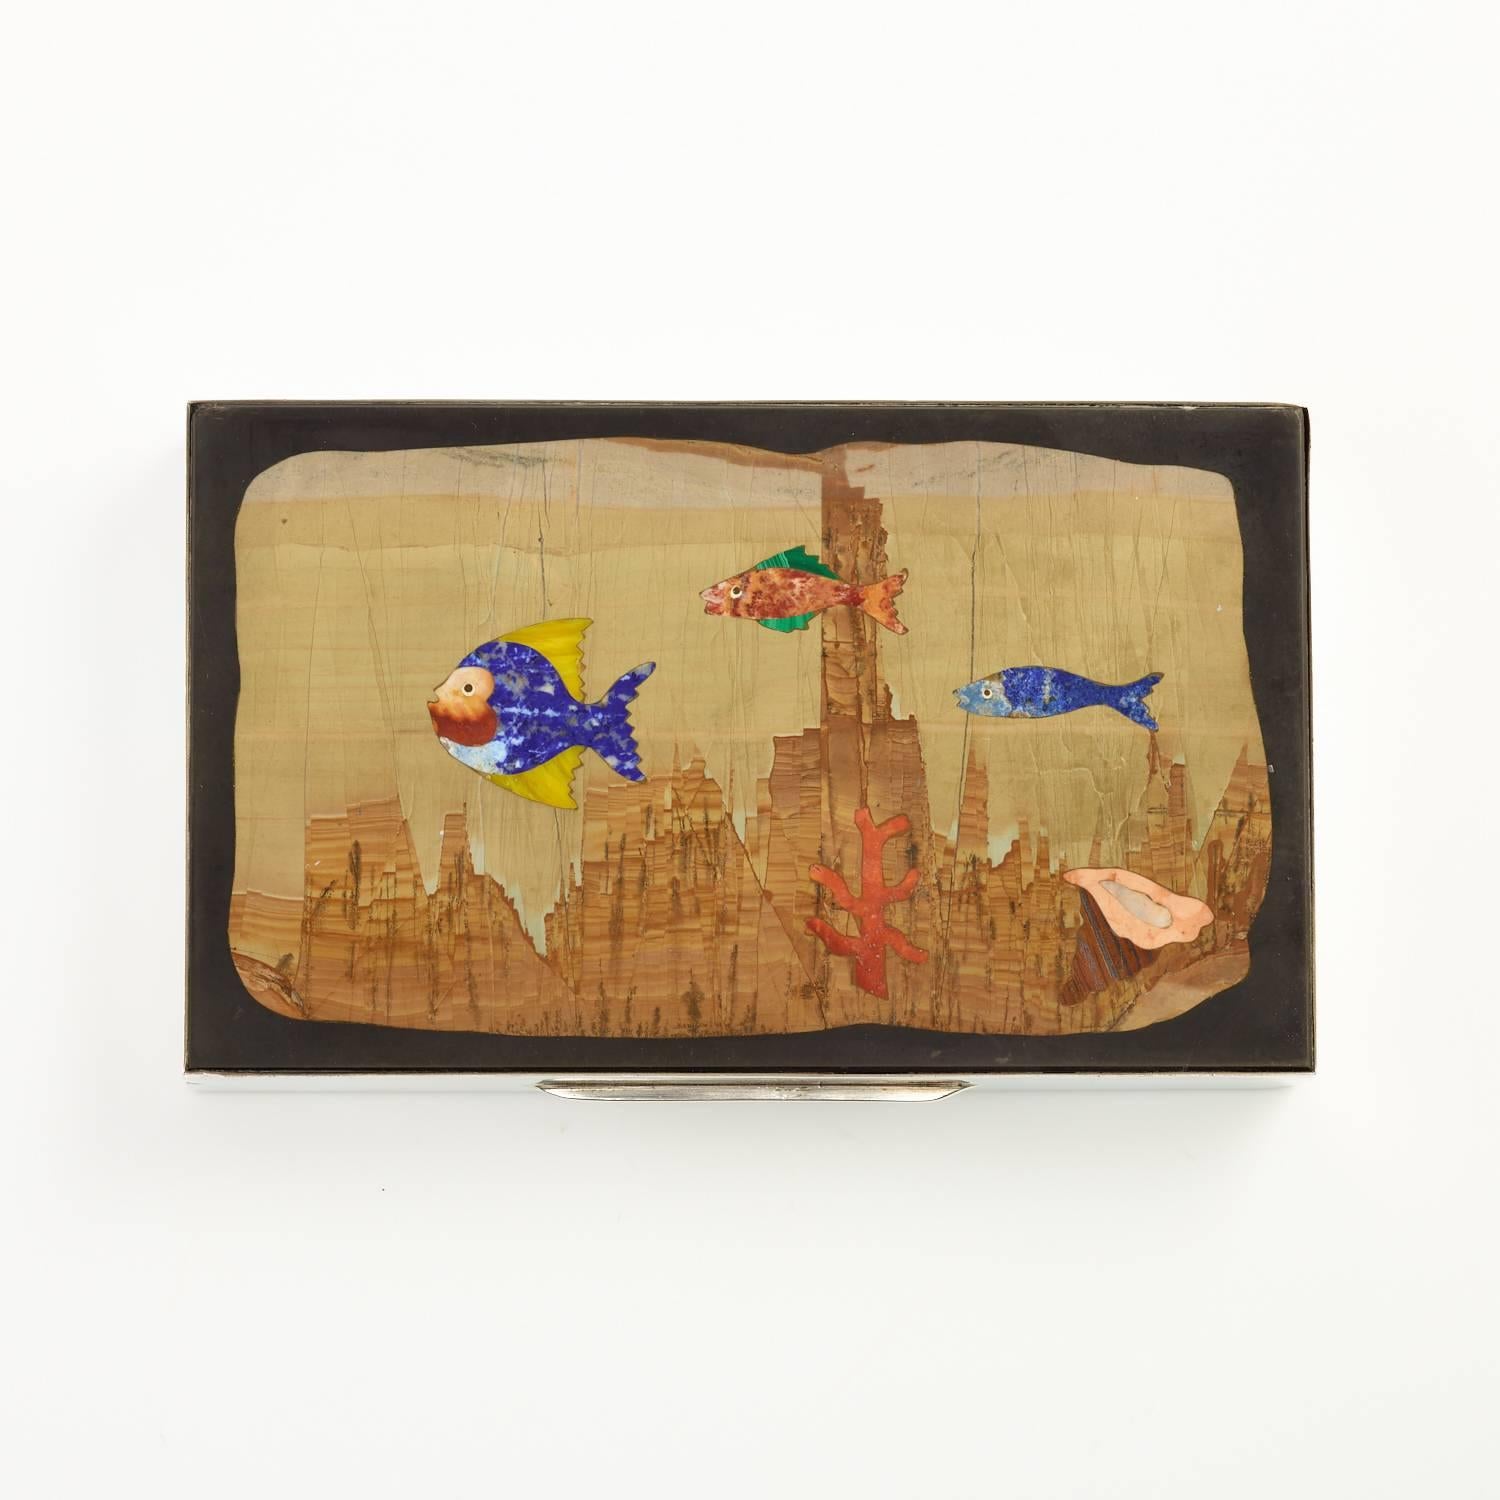 Late 20th Century Mid-20th C Sterling Silver Box with Aquatic Mosaic Scene on the Lid, circa 1960